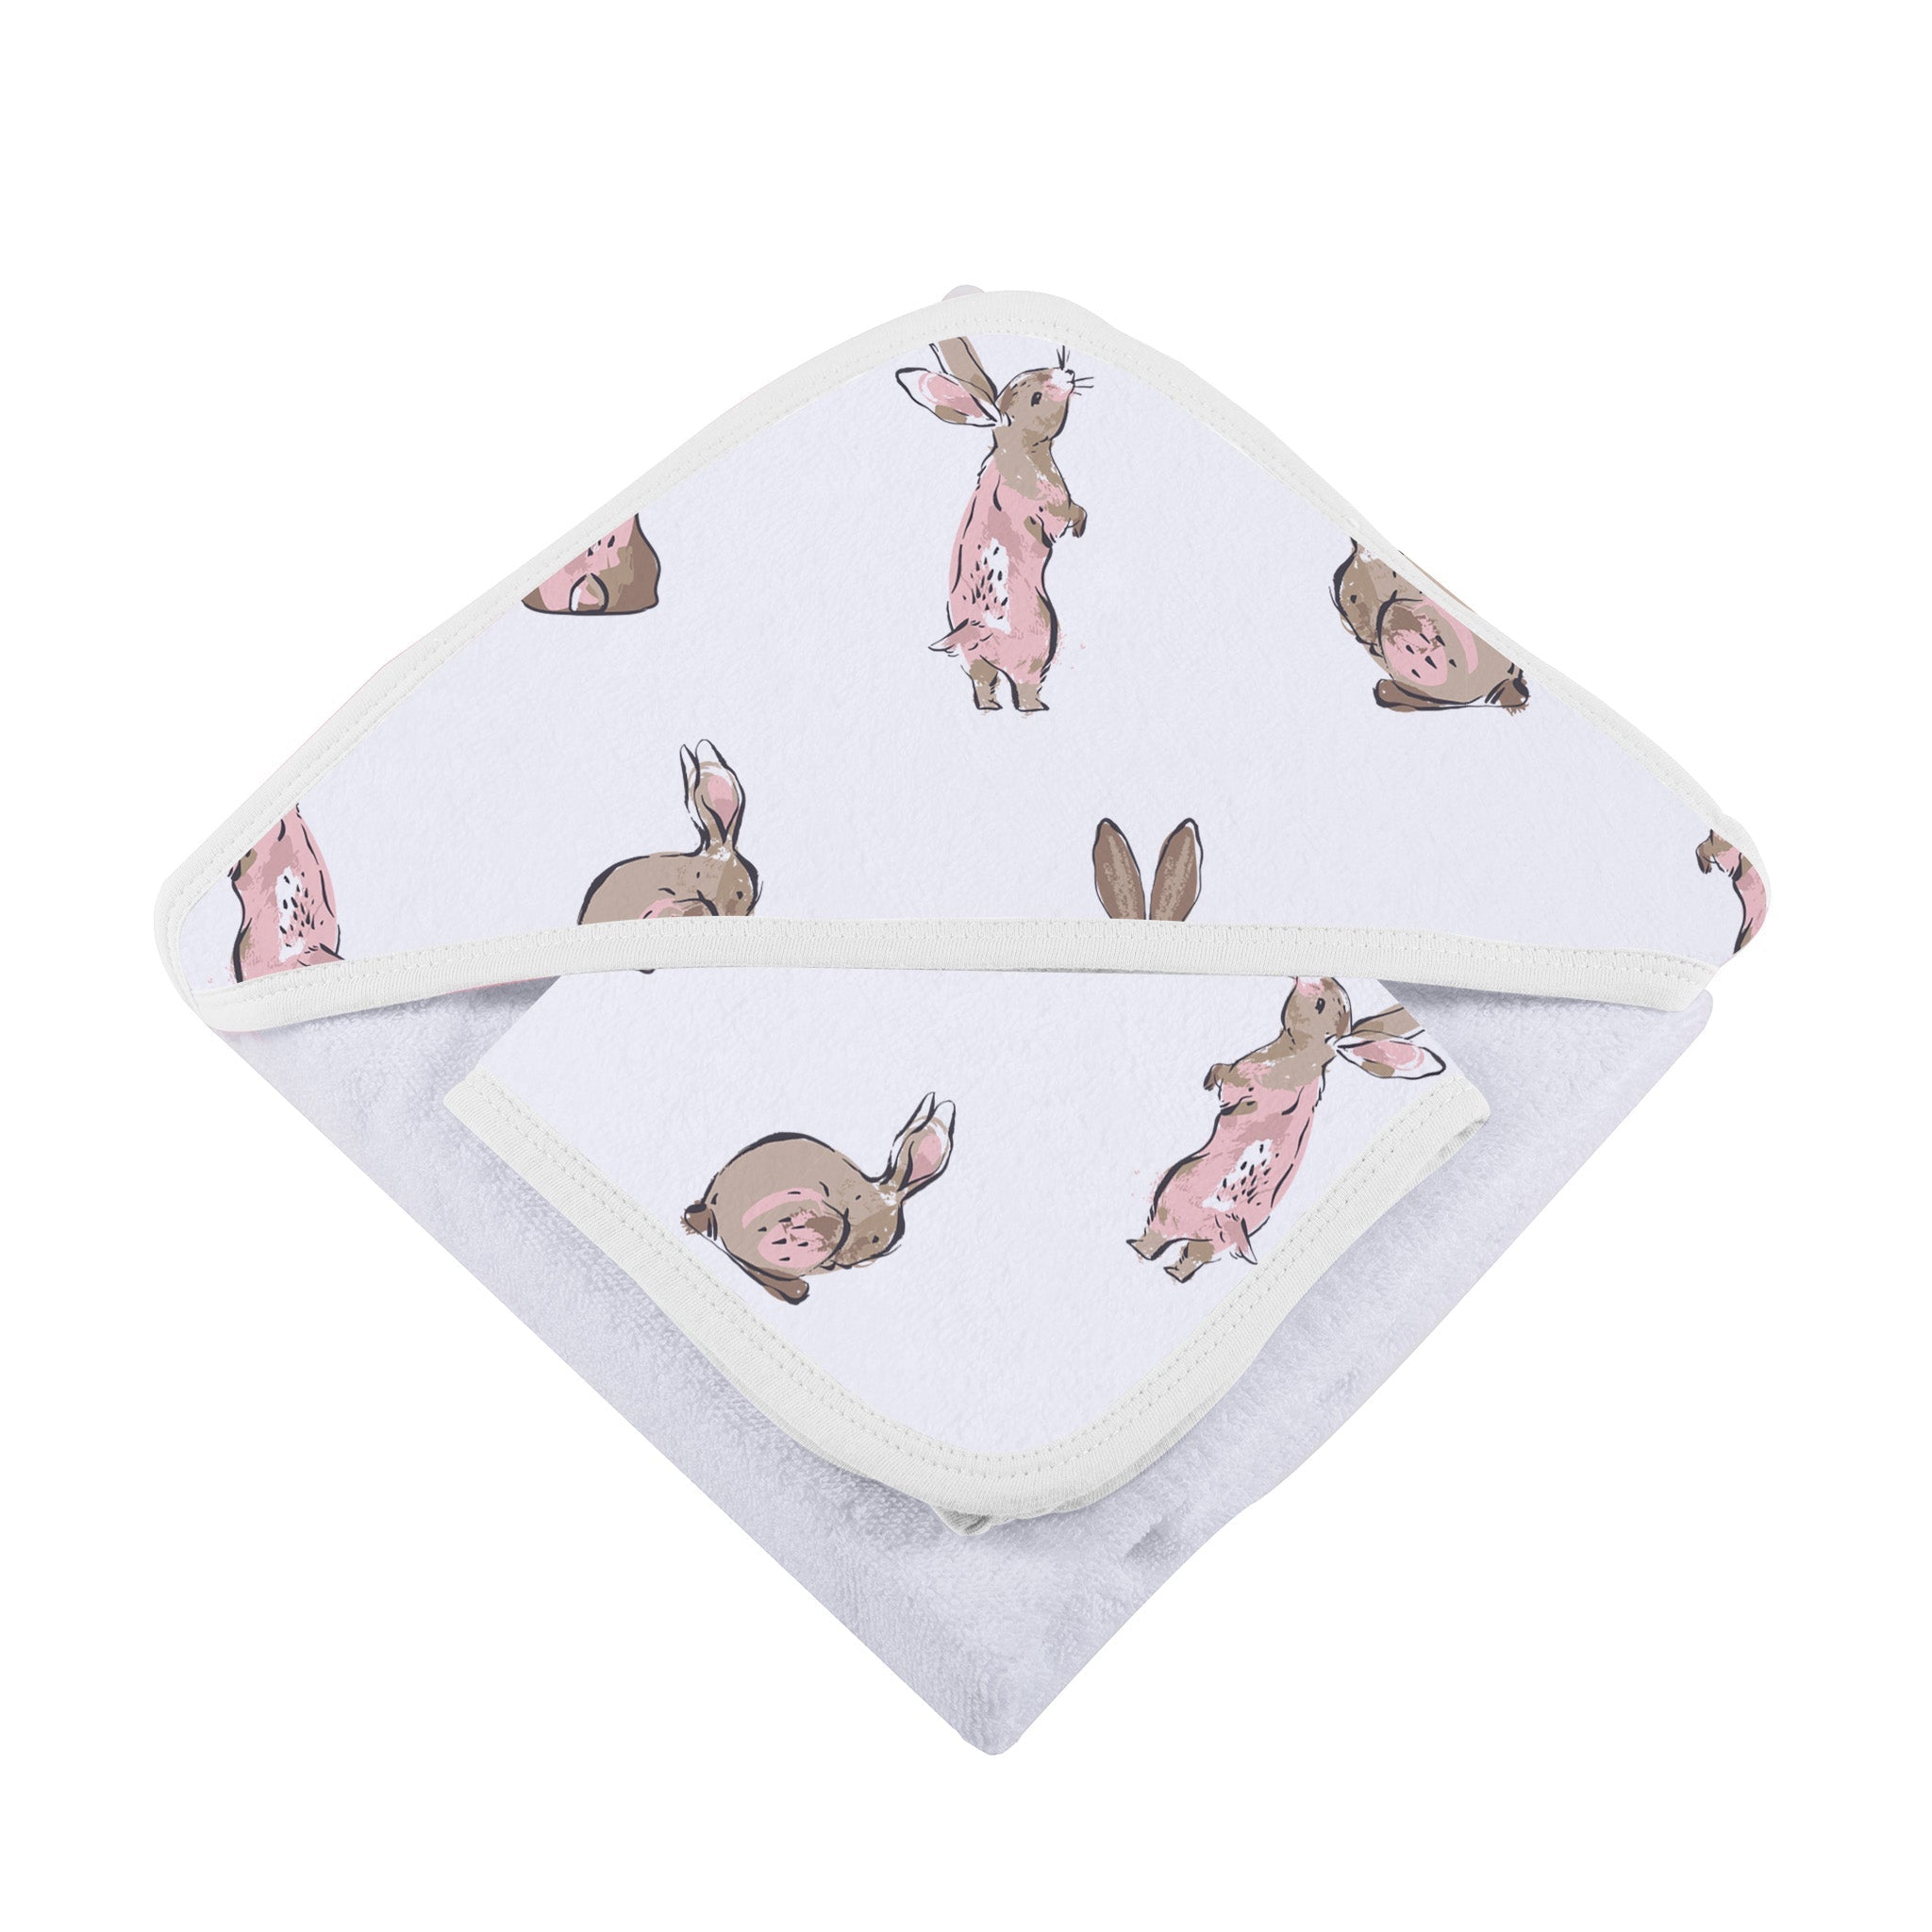 Detail of a baby towel with bunnies and matching washcloth